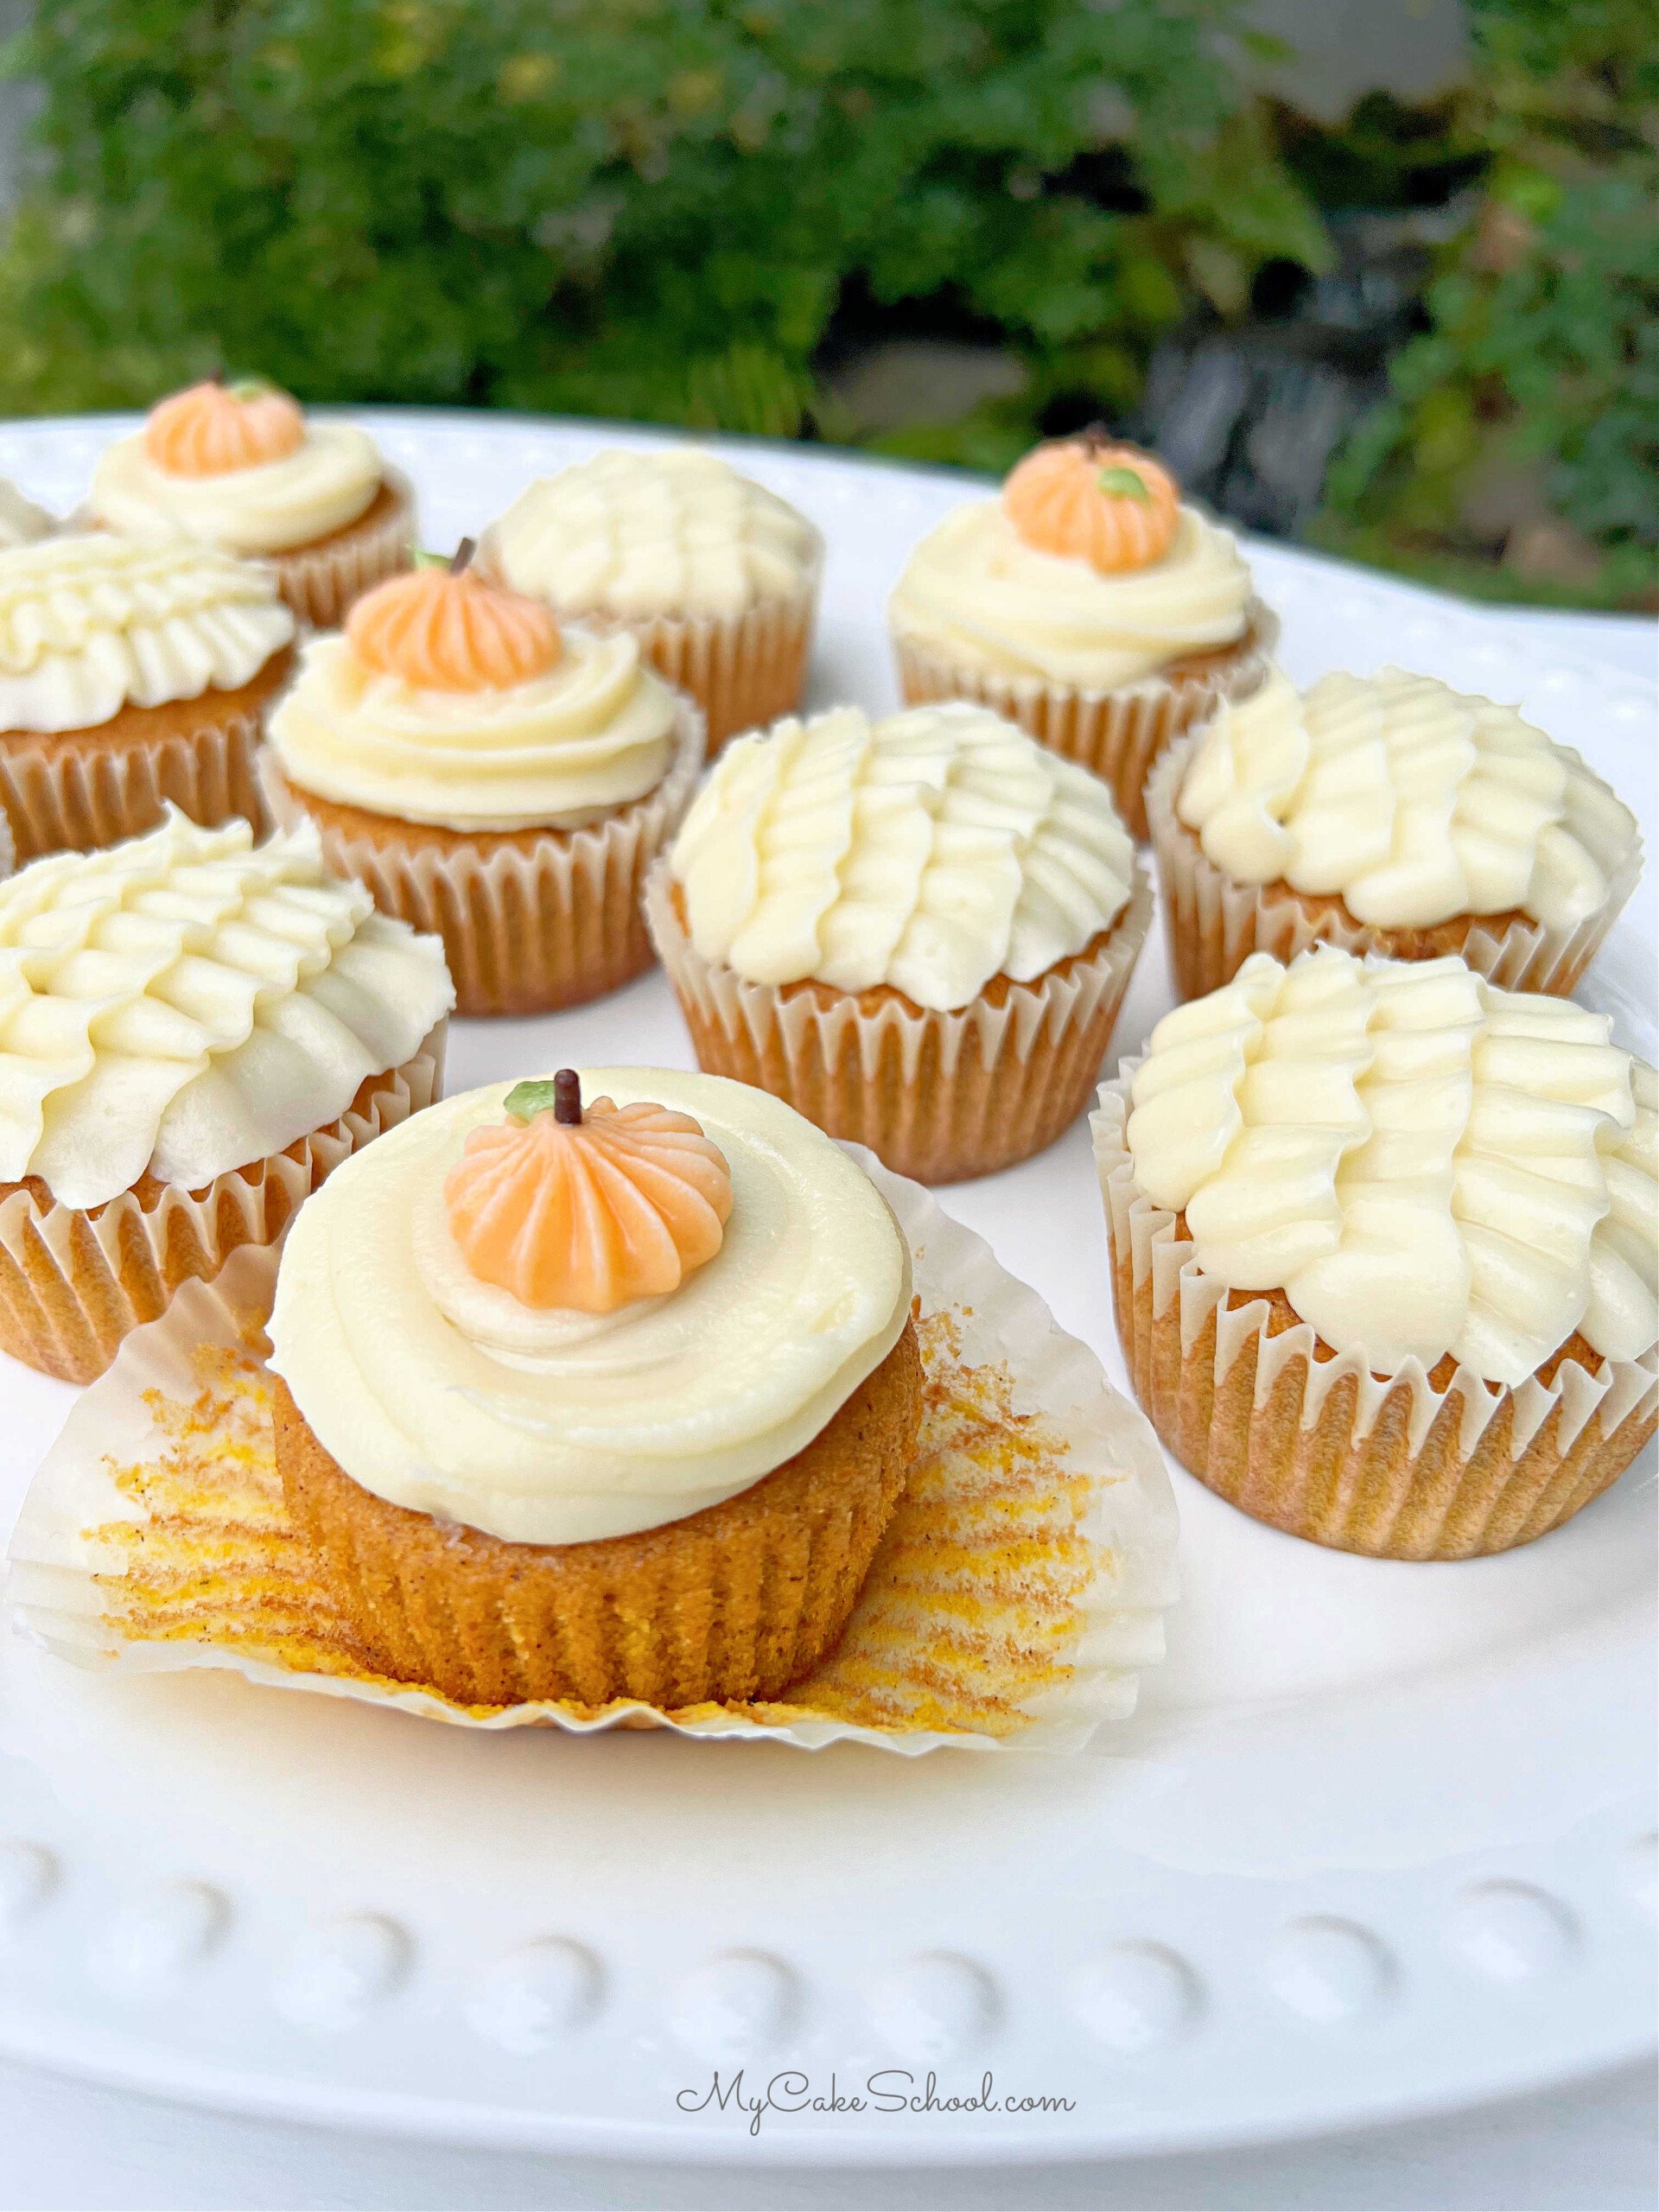 Platter of Pumpkin Cupcakes, topped with cream cheese frosting and piped pumpkins.